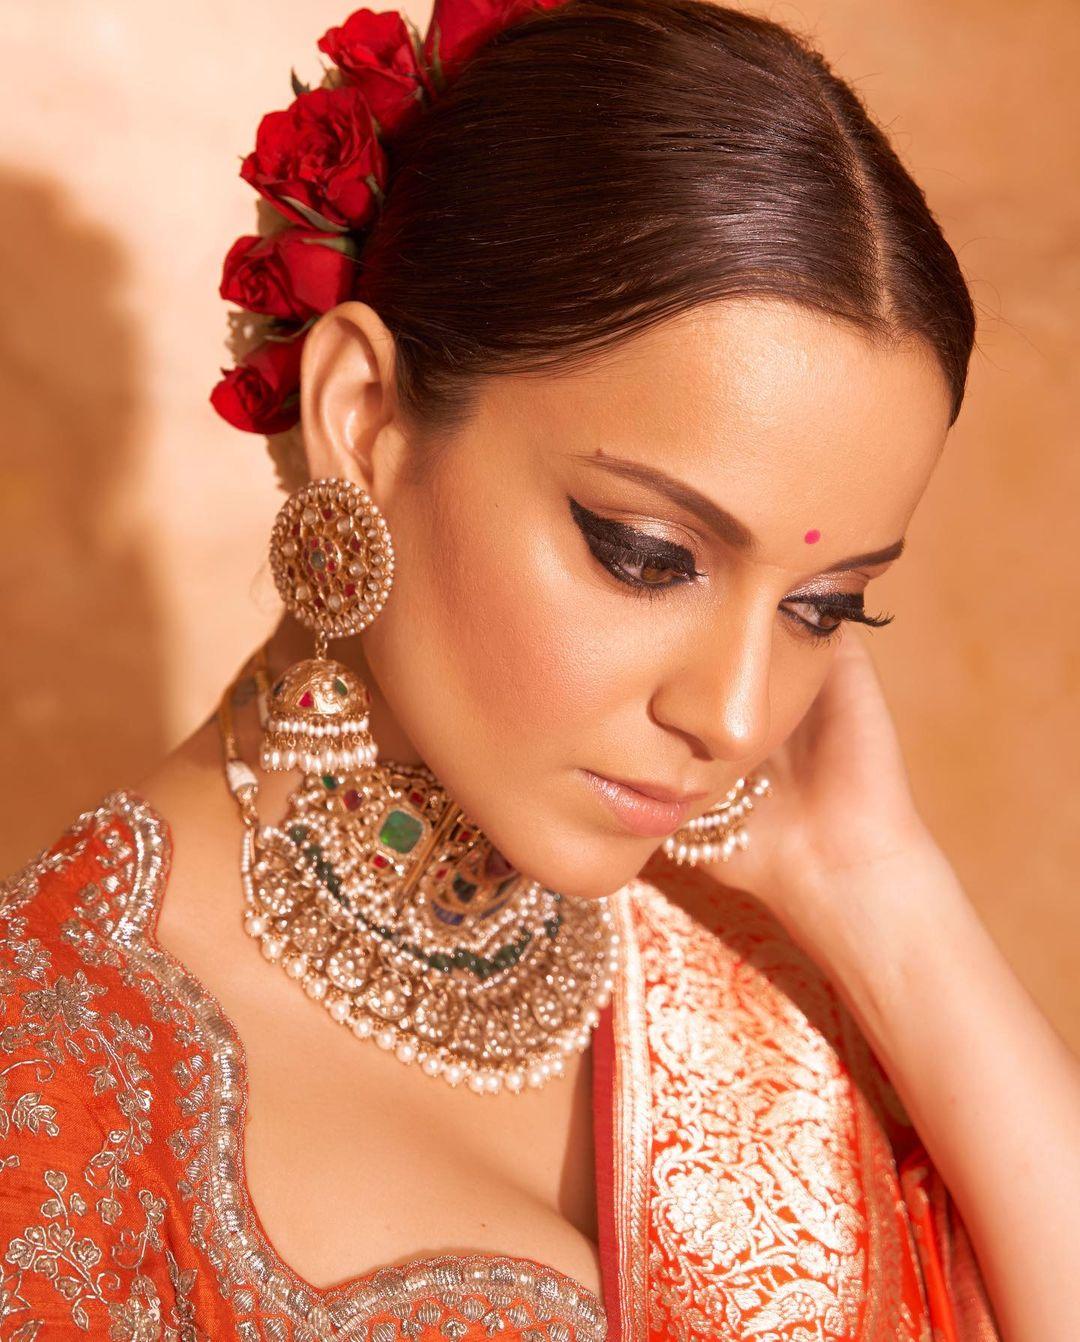 The actress's sharp liner and contouring enhanced her facial features. She put on heavy jhumkas and an intricate necklace to finish her glamorous look. The actress's pretty red bindi on the forehead stole hearts